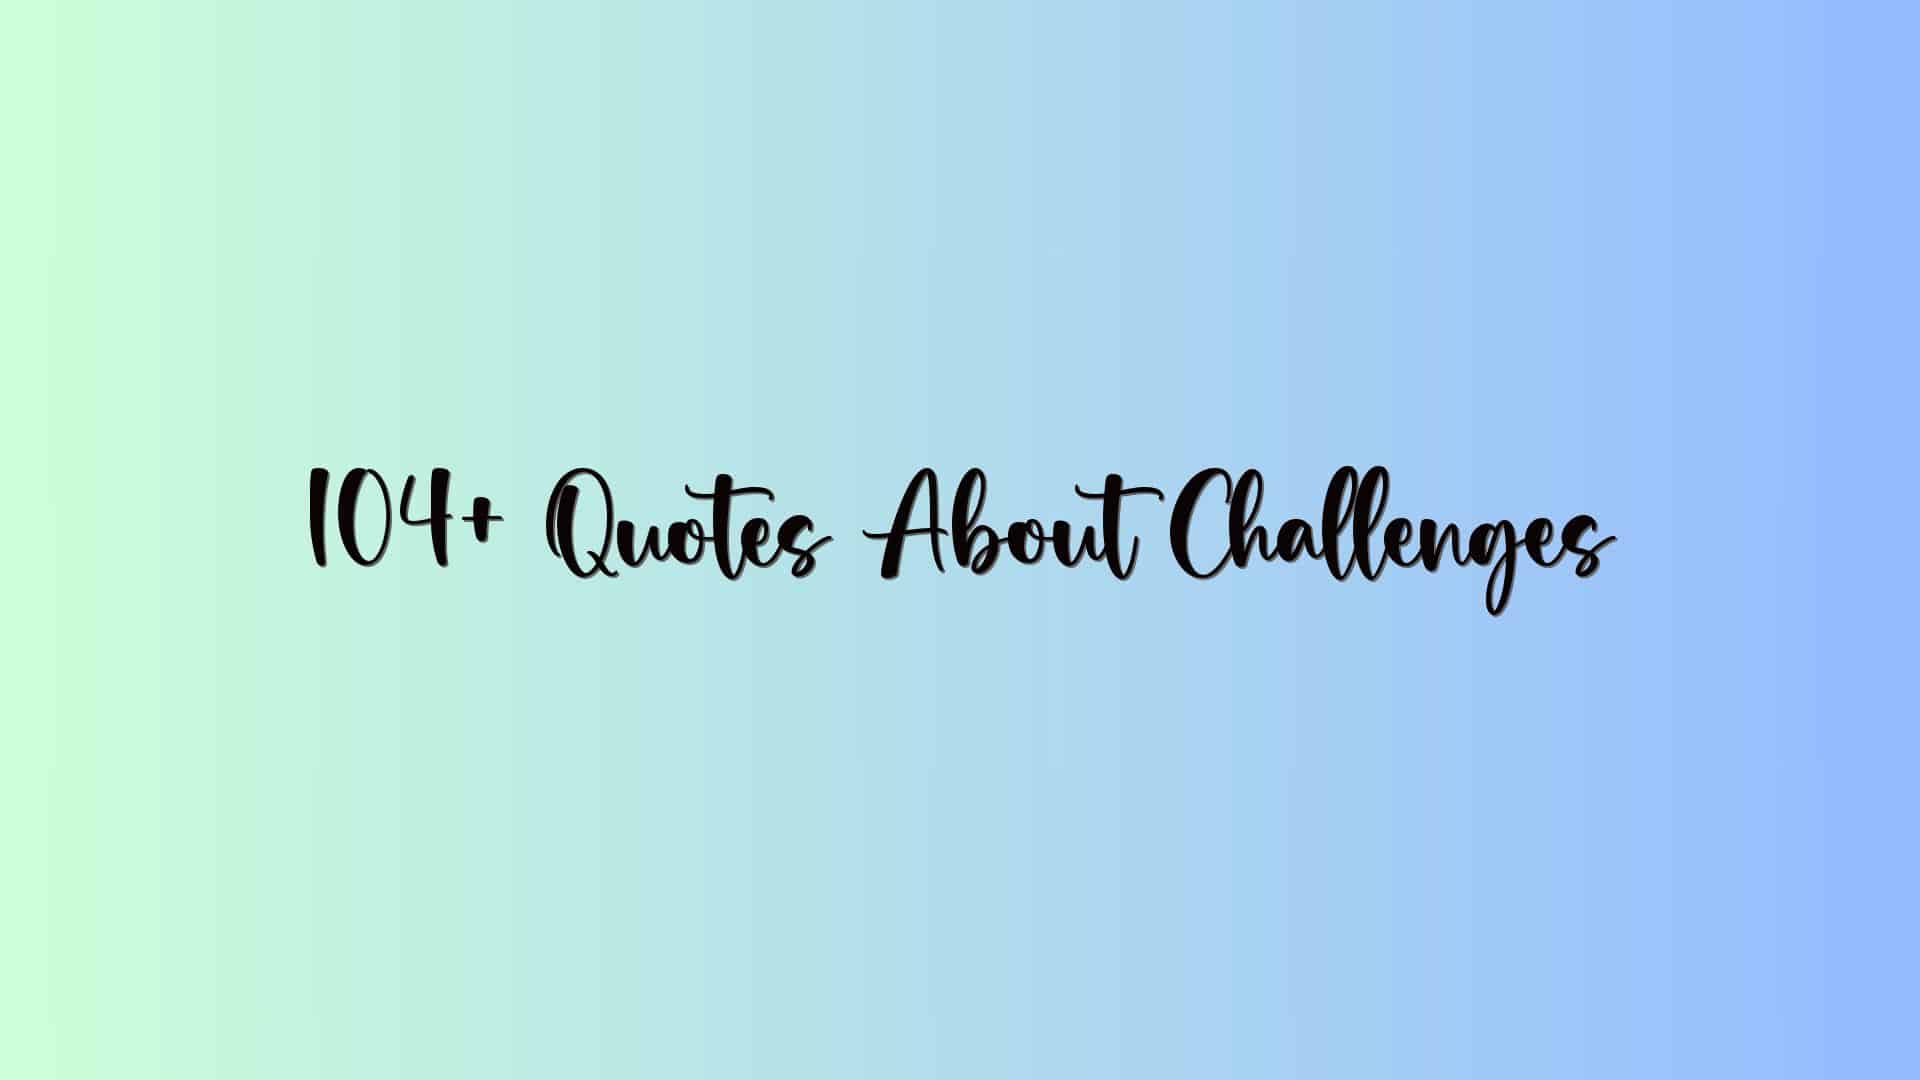 104+ Quotes About Challenges